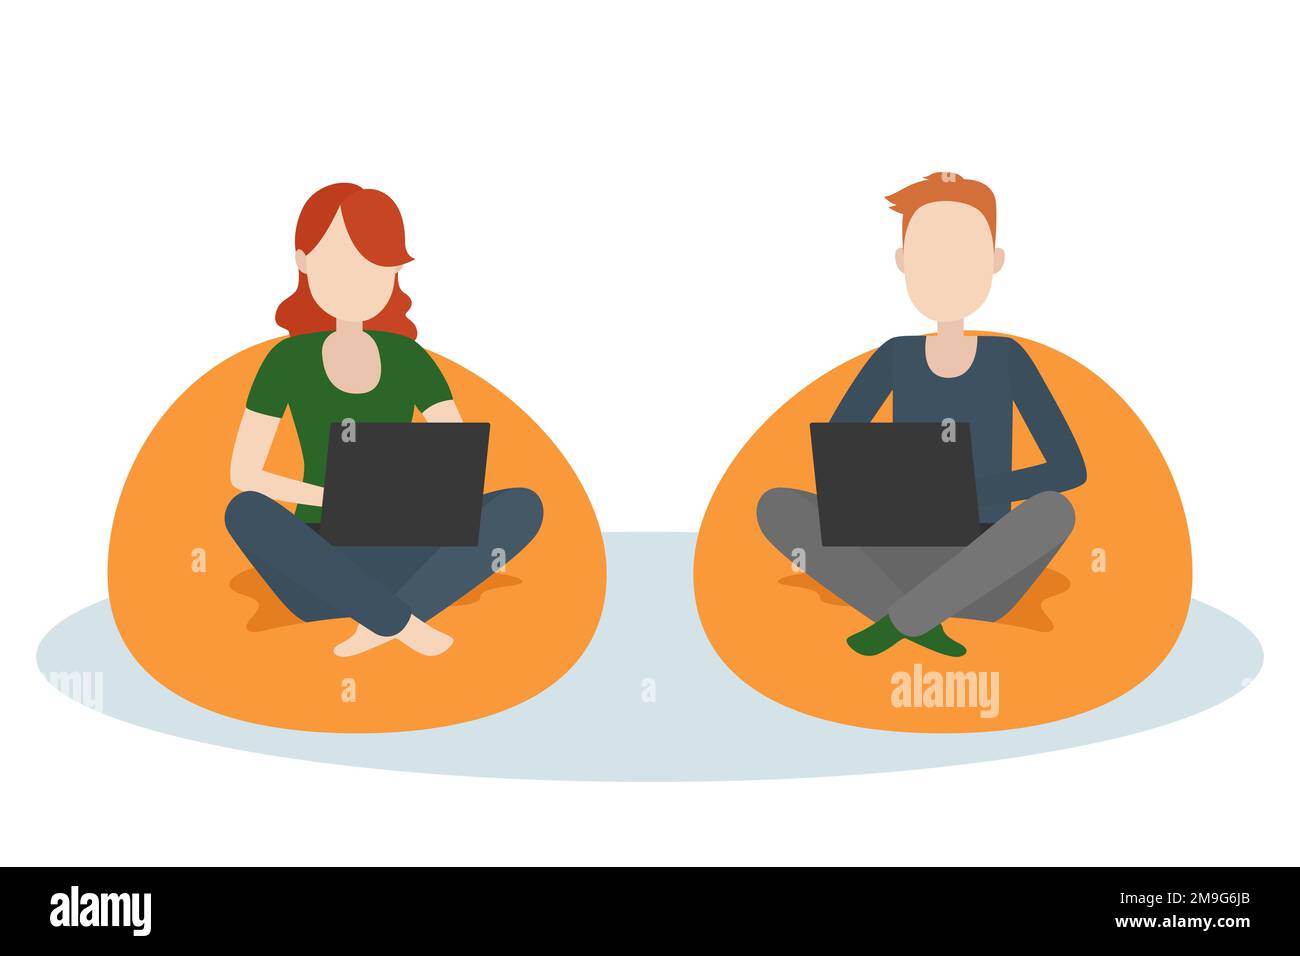 Man and woman sitting on floor pillows with laptops. Vector illustration. Stock Vector